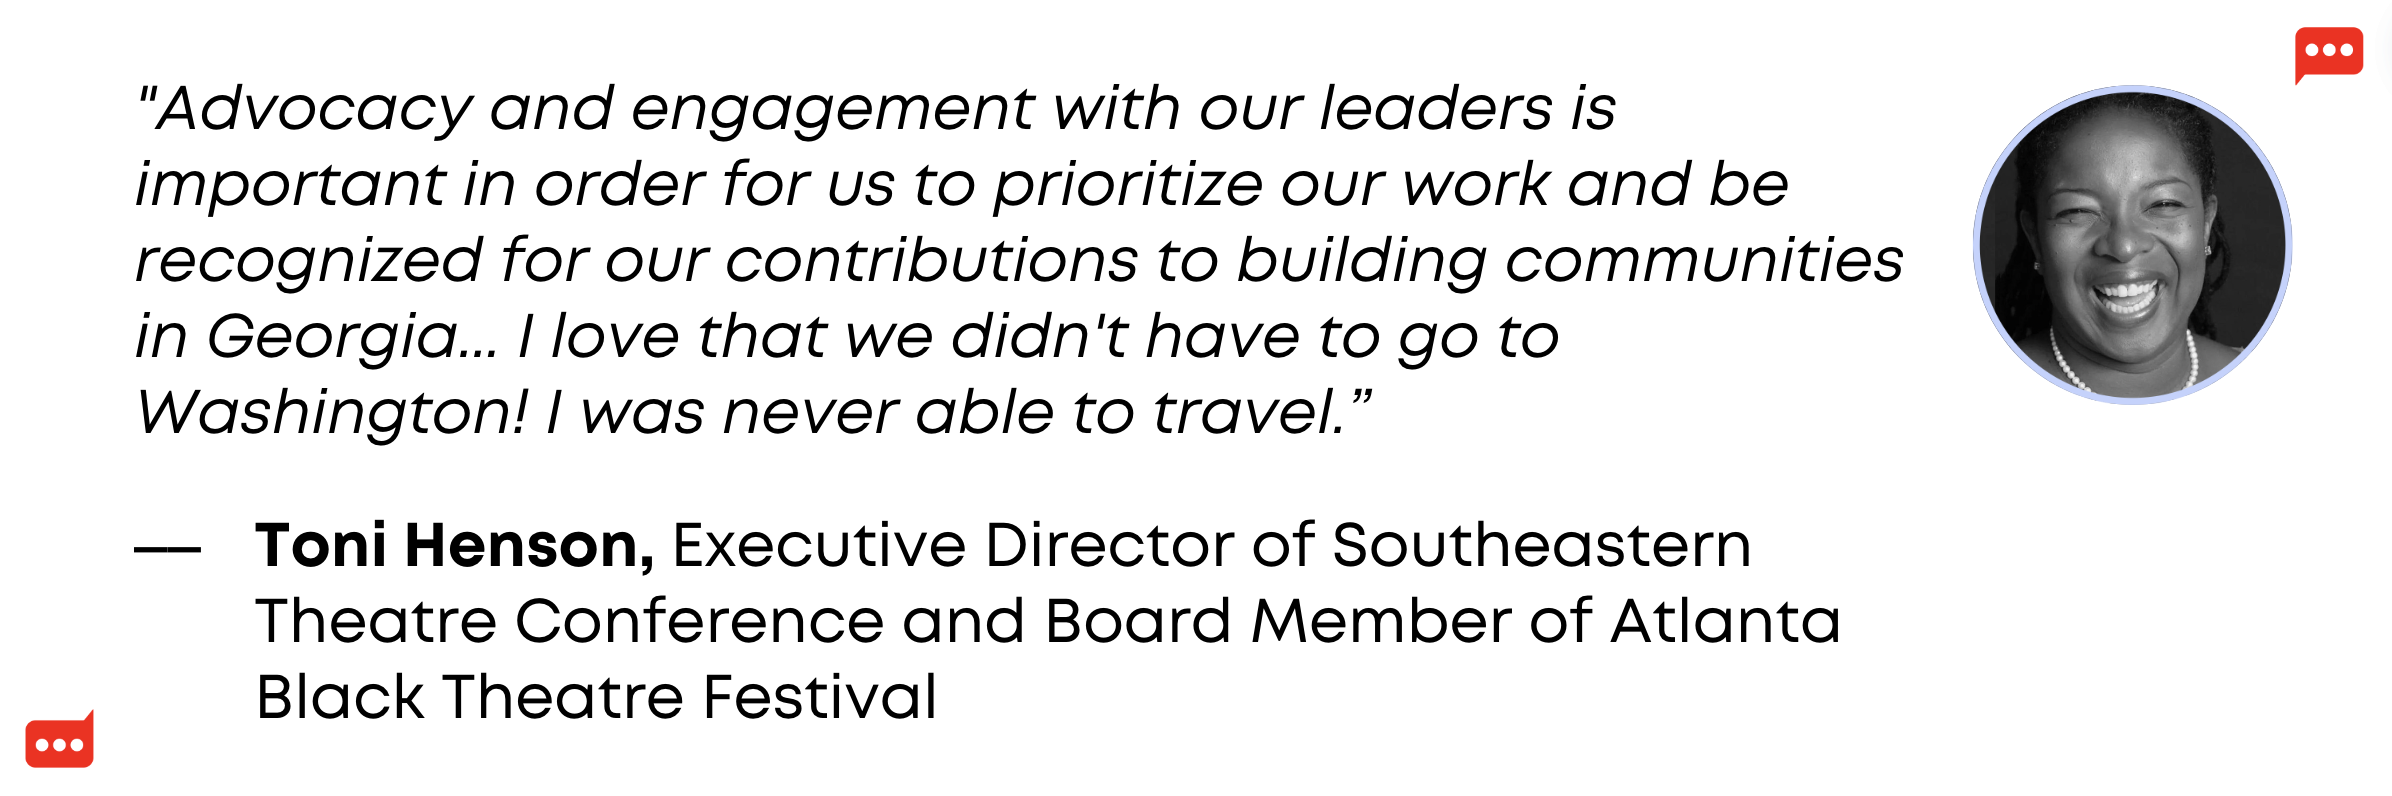 "Advocacy and engagement with our leaders is important in order for us to prioritize our work and be recognized for our contributions to building communities in Georgia... I love that we didn't have to go to Washington! I was never able to travel.” - Toni Henson, Executive Director of Southeastern Theatre Conference and Board Member of Atlanta Black Theatre Festival